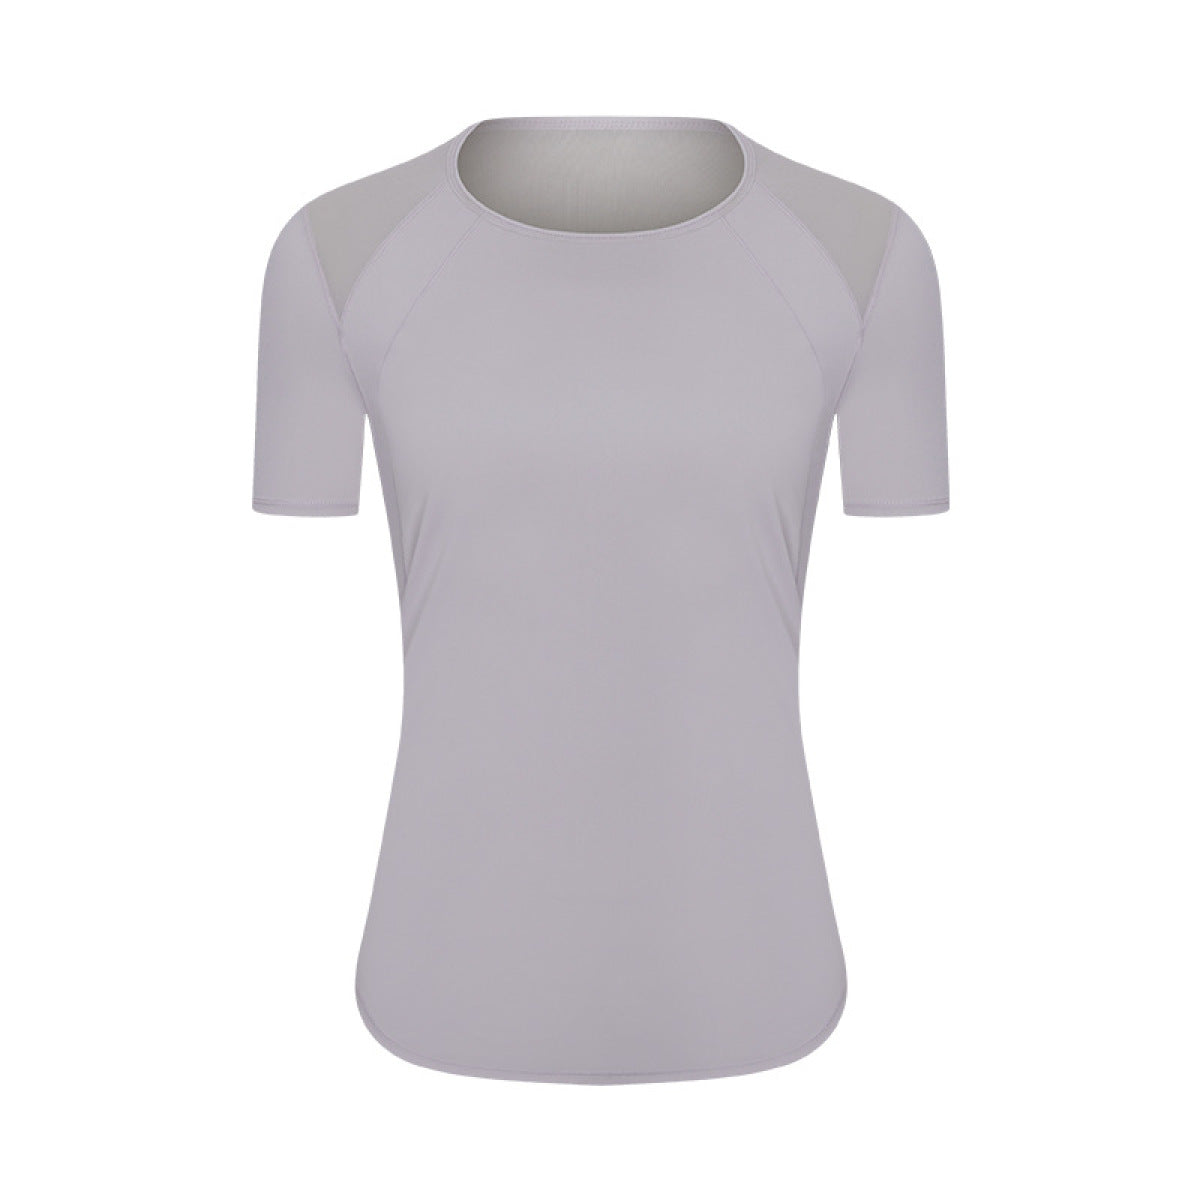 Mesh Splicing Cut Out Fast Dry Active Top